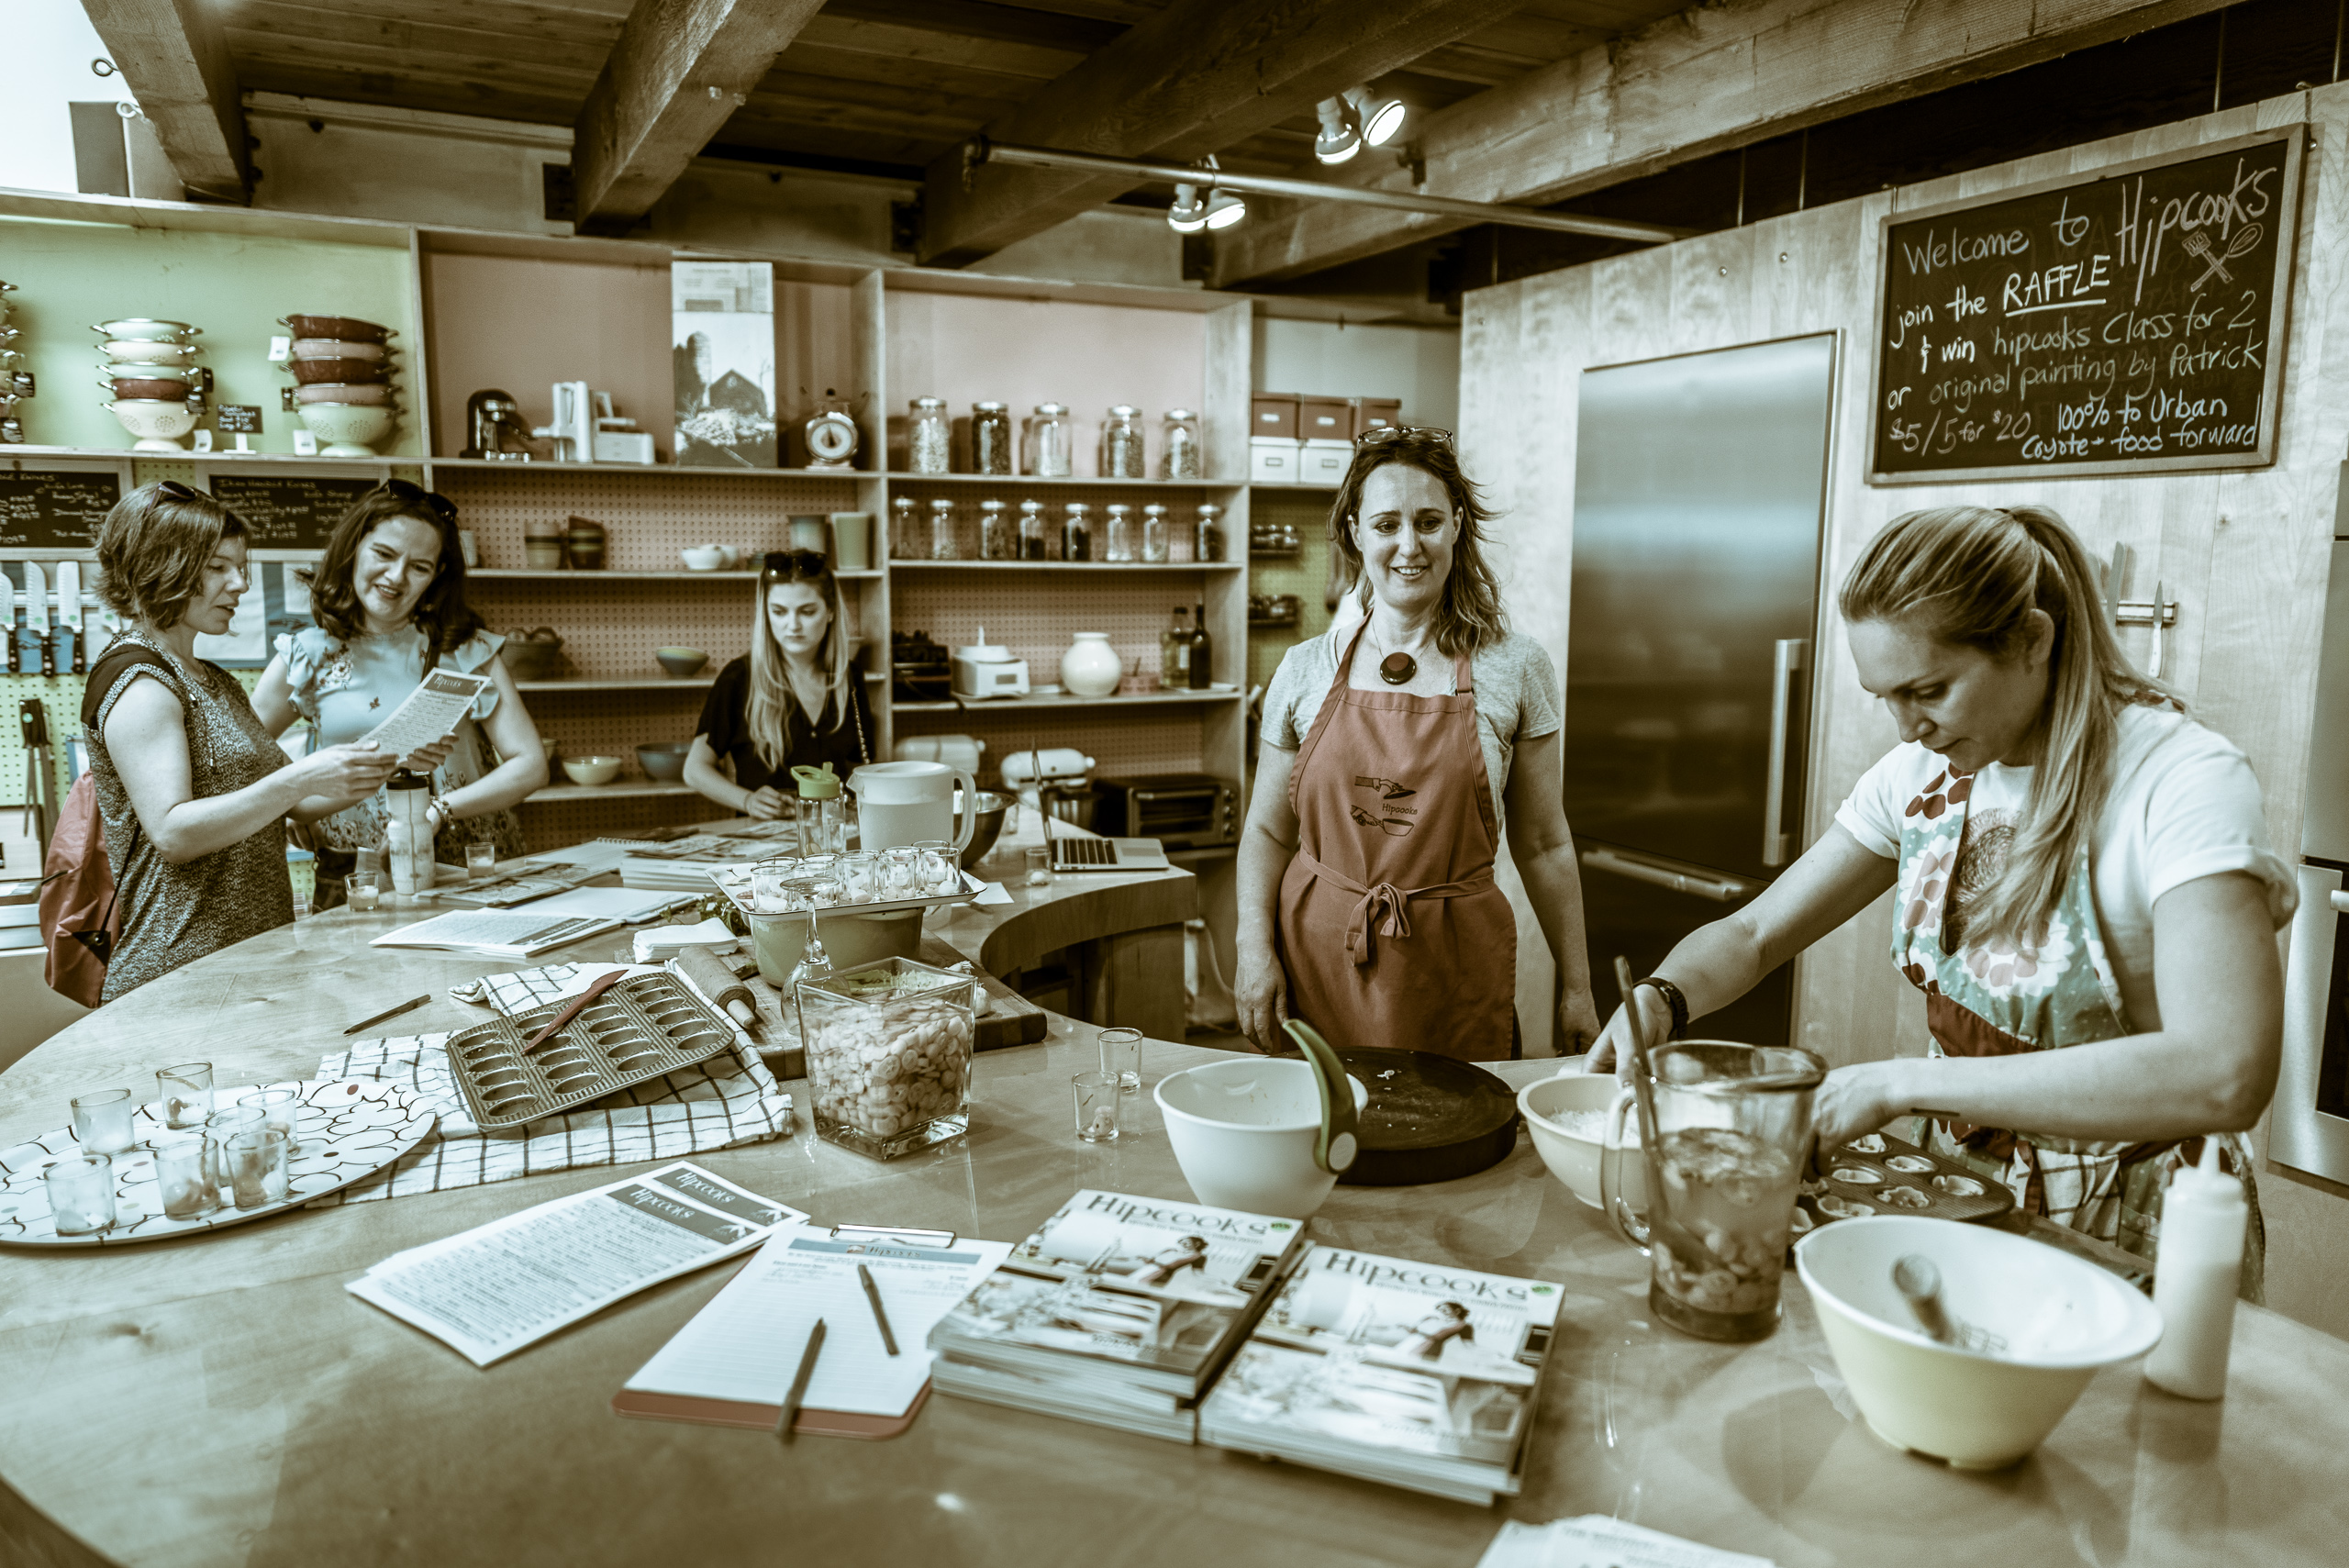 inside the Hipcooks space at The Brewery Artist's Lofts in Downtown Los Angeles. Around a large, semicircular table, one person prepares a dish, one supervises, and another group of 3 examine some items